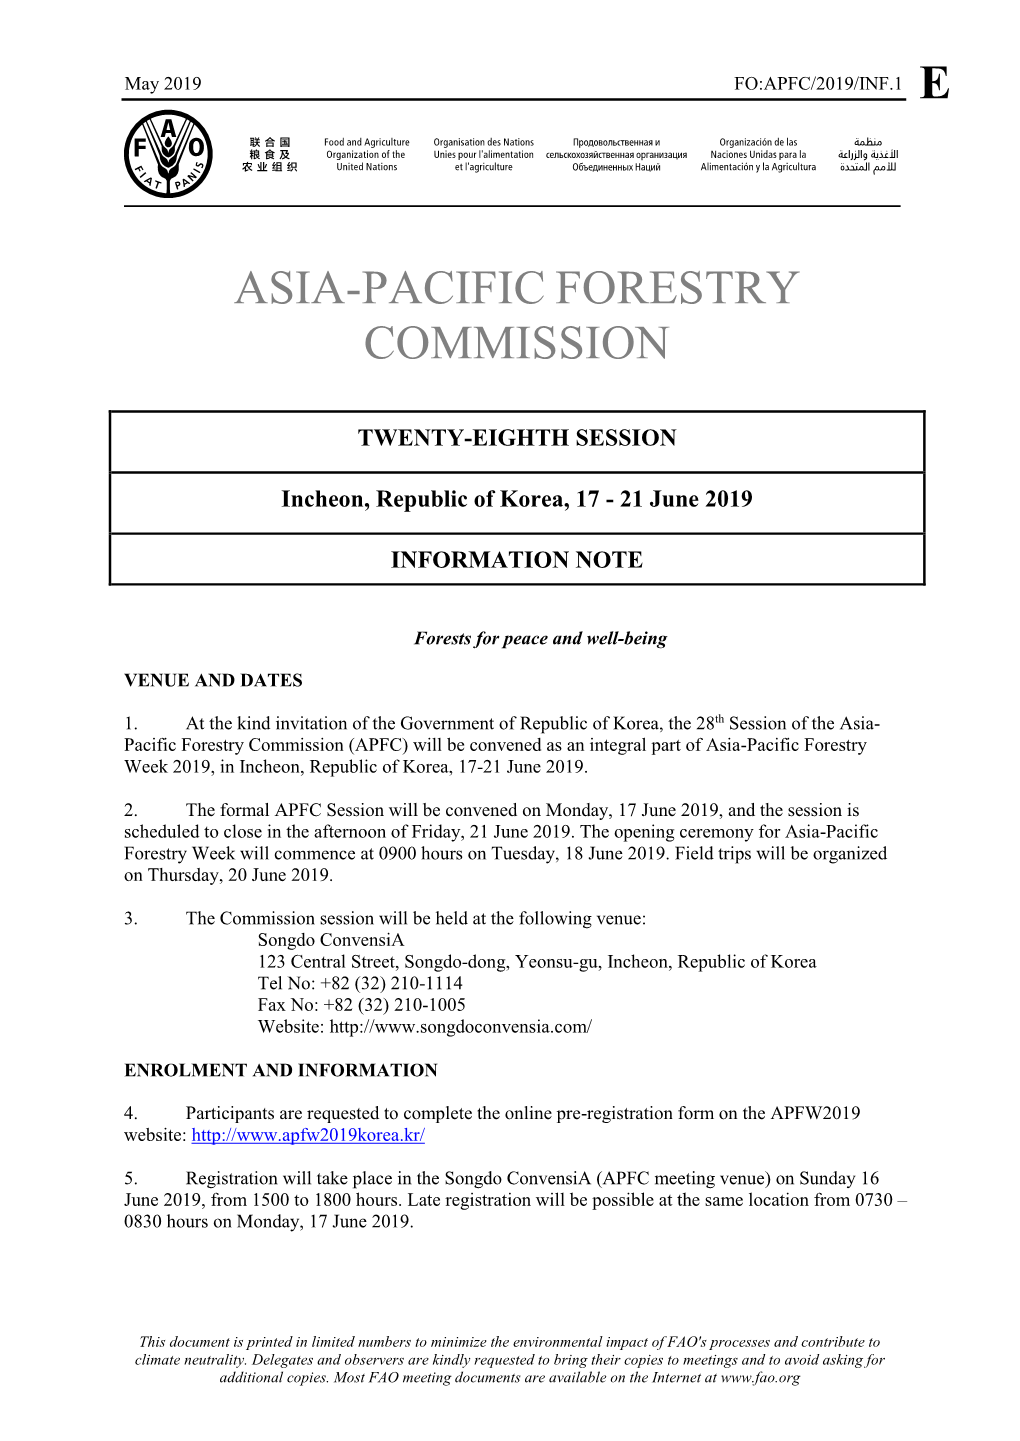 Information Note of the Twenty-Eighth Session of the Asia-Pacific Forestry Commission FO:APFC/2000/INF.1